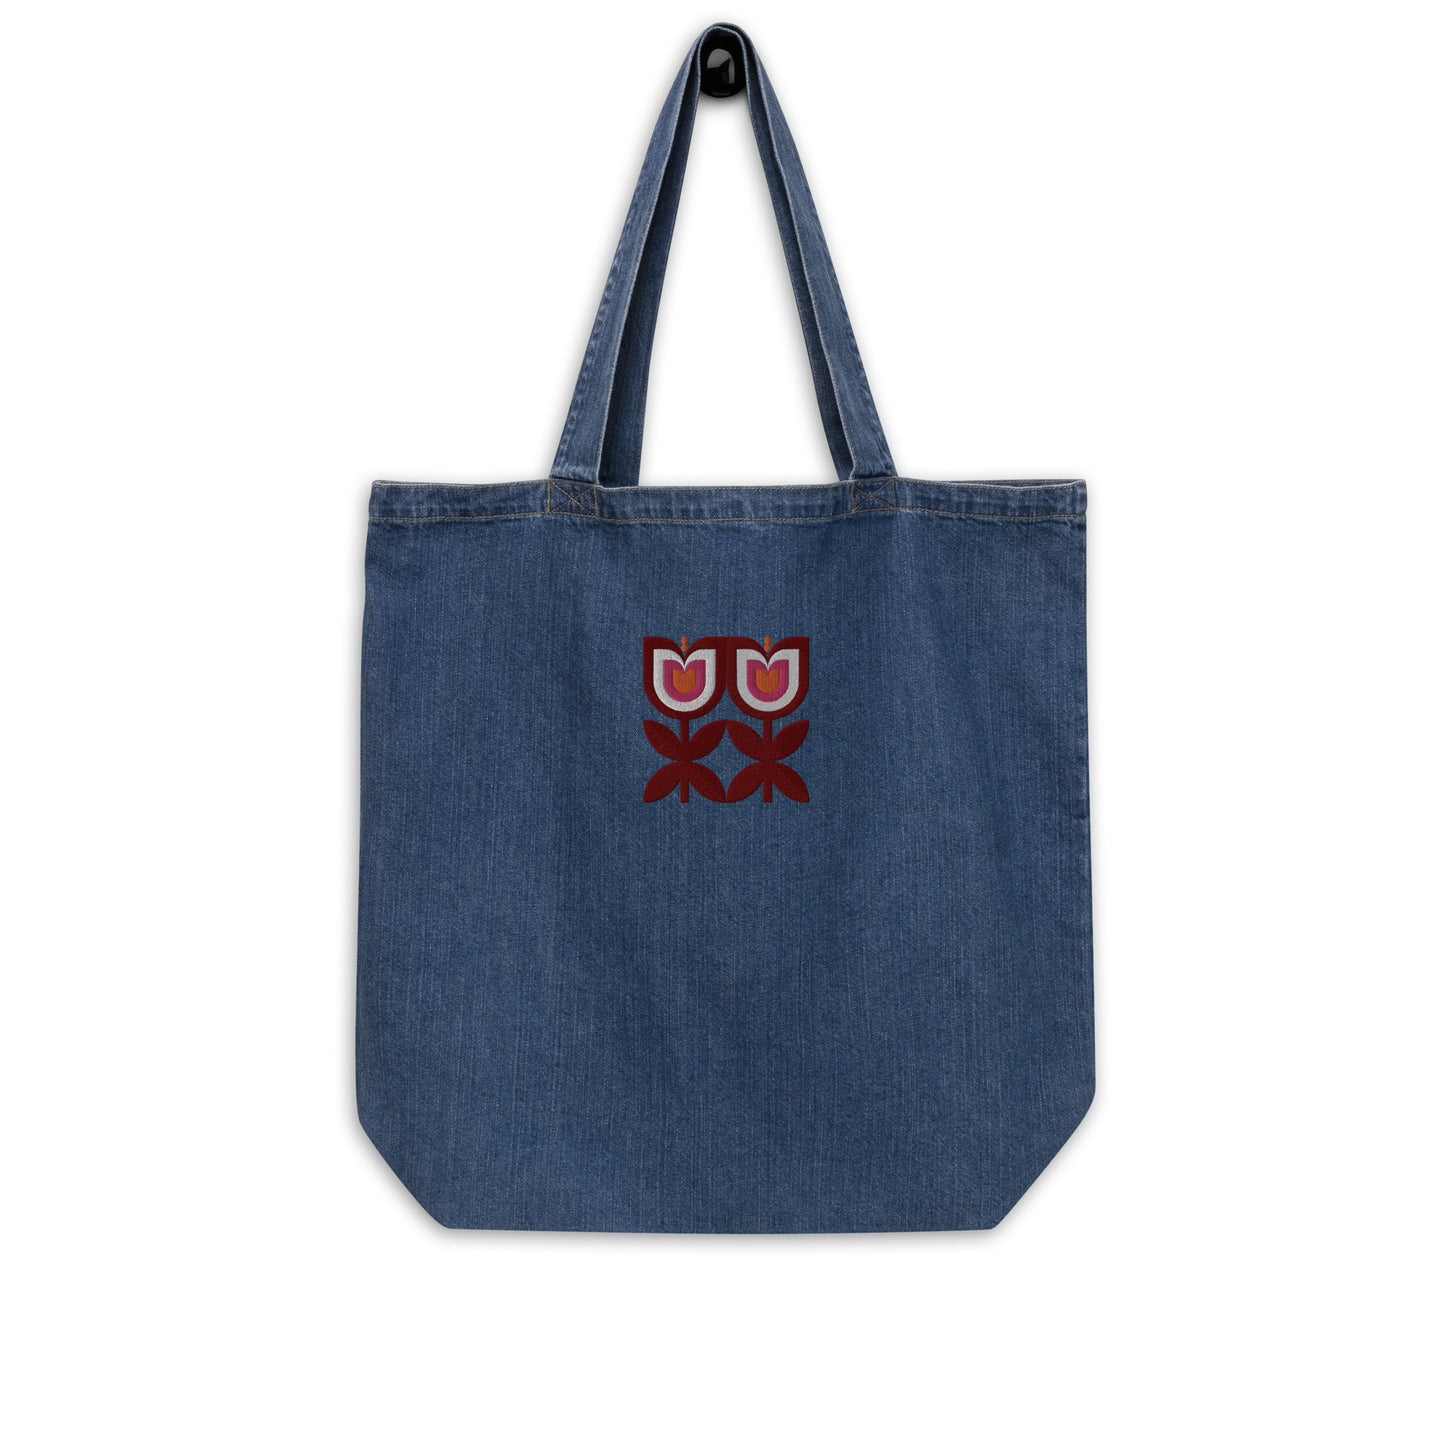 Tulip flower embroidered shopper bag made from organic cotton